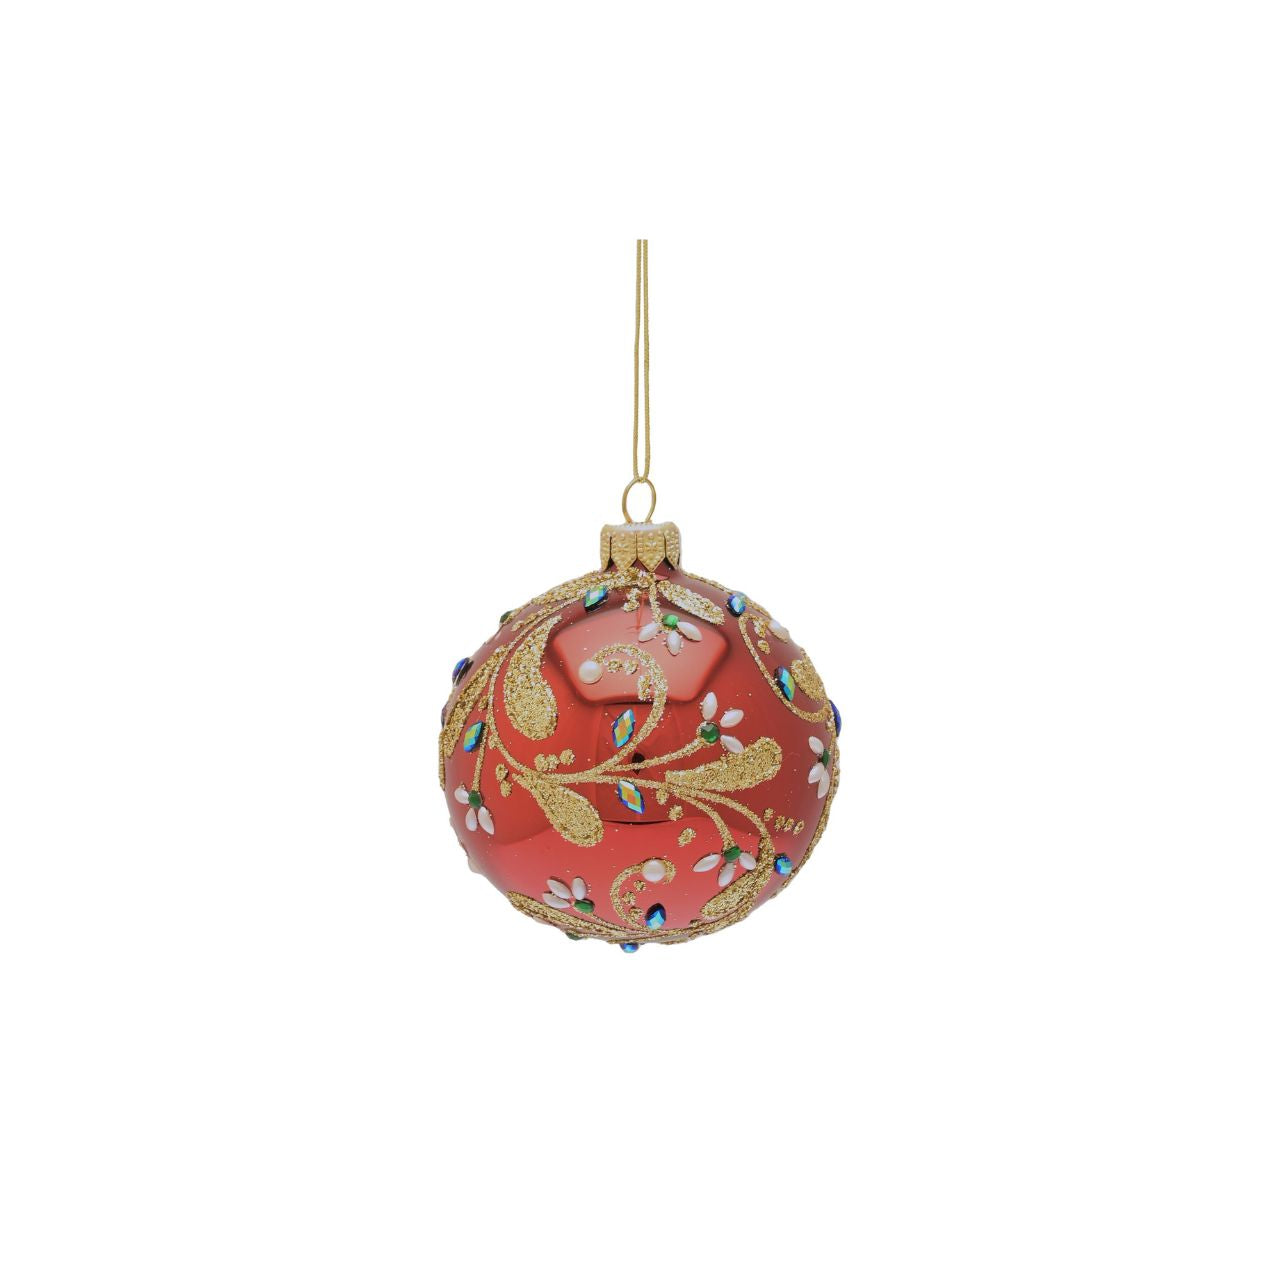 Red Christmas Bauble Leaf Design Hand Decorated  A Leaf hand decorated red bauble by THE SEASONAL GIFT CO.  This ornate Christmas bauble exudes festive cheer and will stand out amongst the branches on the tree.